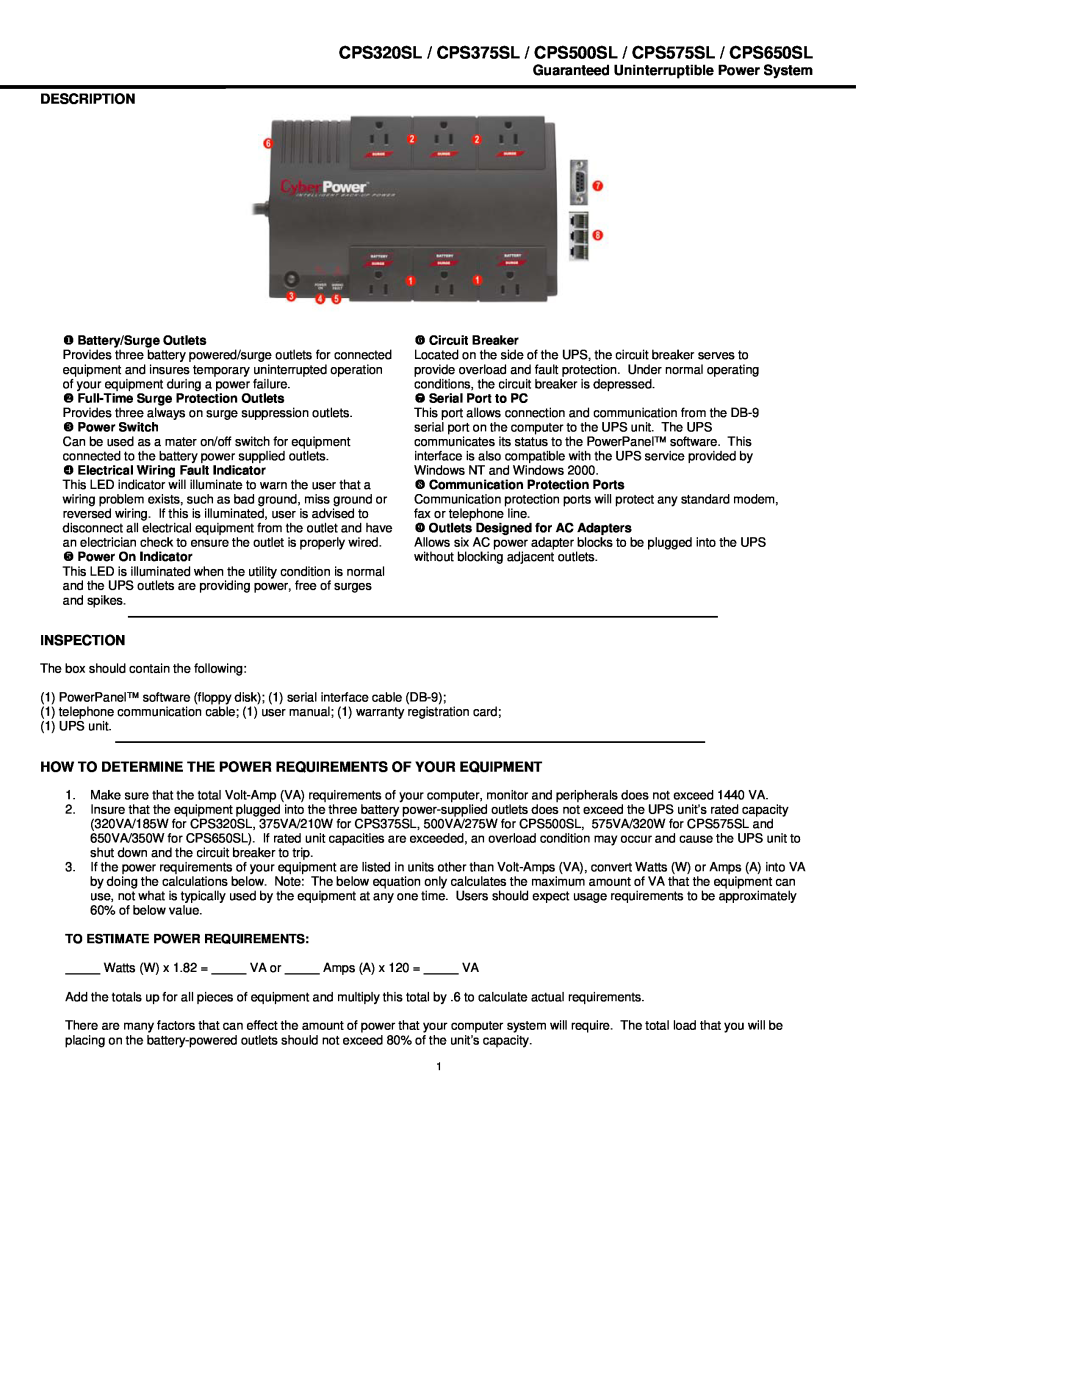 CyberPower Systems user manual CPS320SL / CPS375SL / CPS500SL / CPS575SL / CPS650SL, Inspection, X Battery/Surge Outlets 